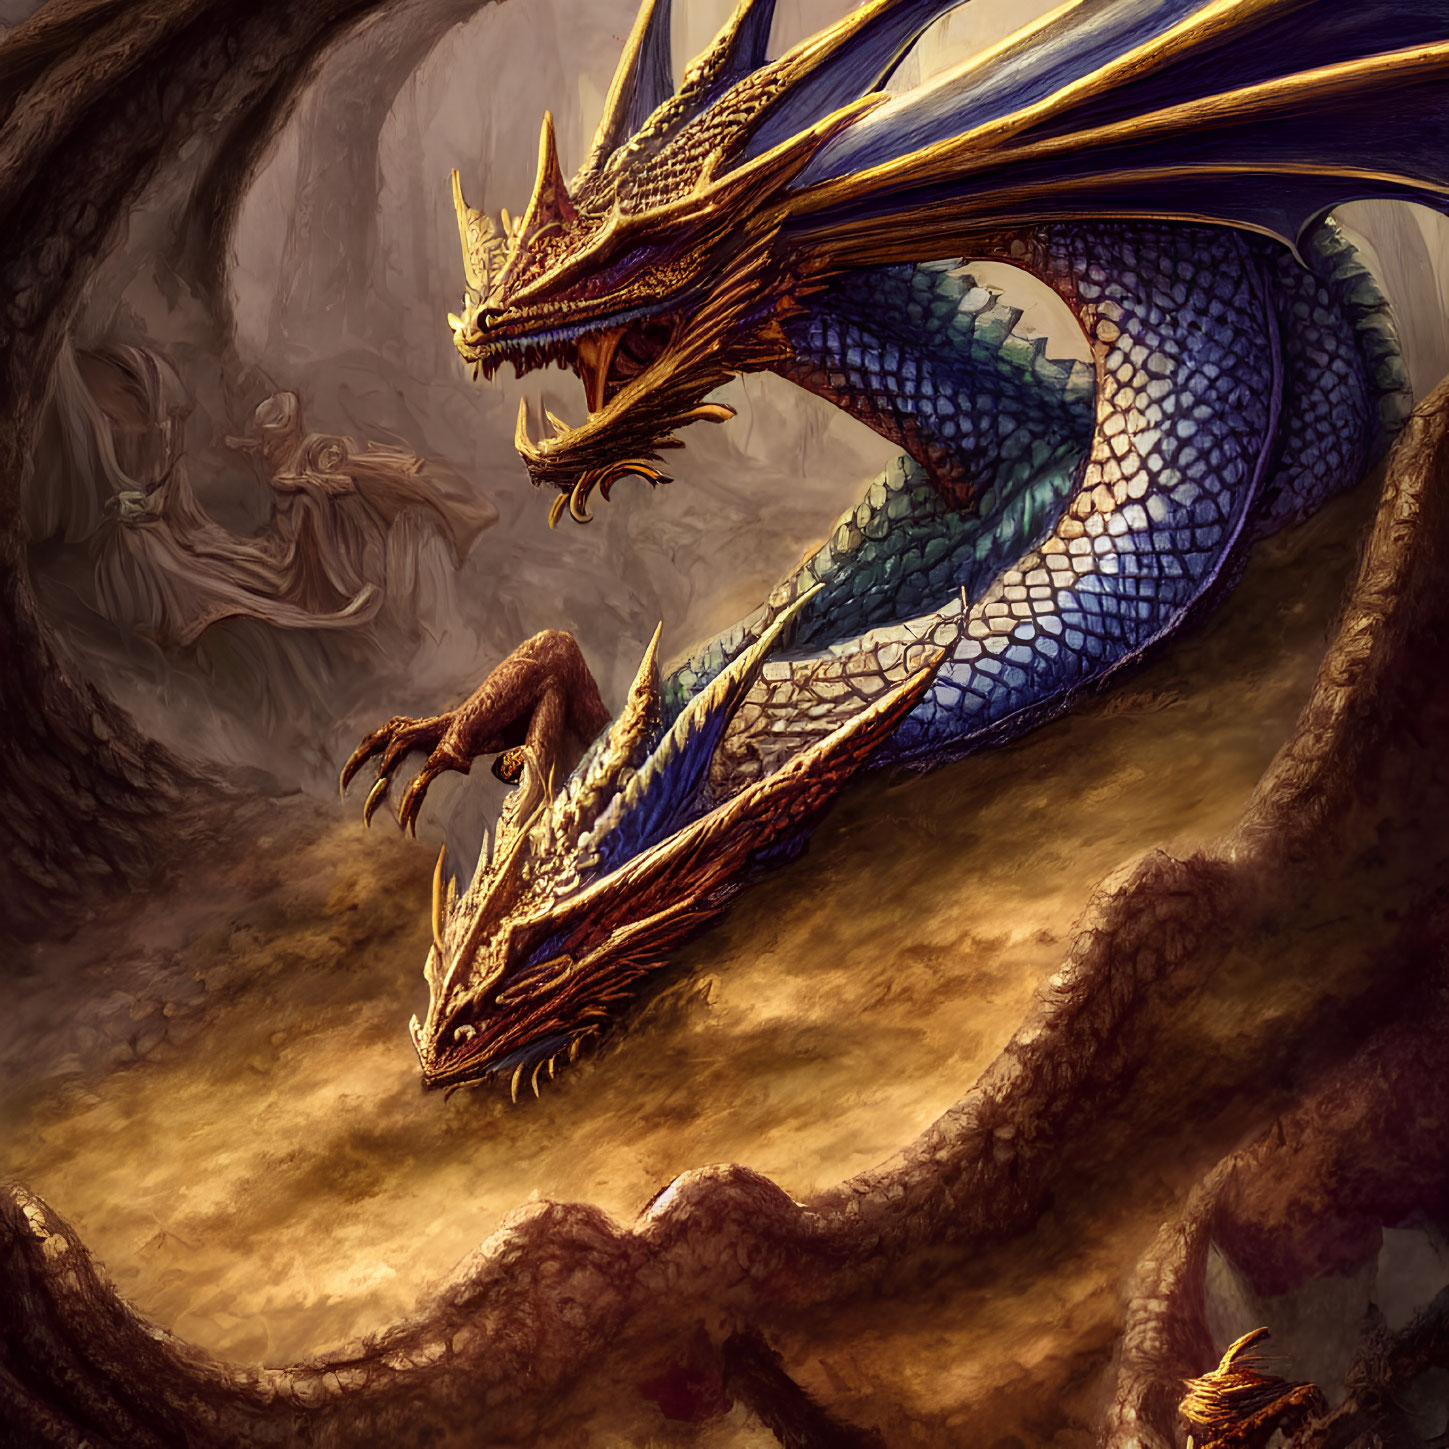 Iridescent blue dragon with golden horns in cave with mysterious figures